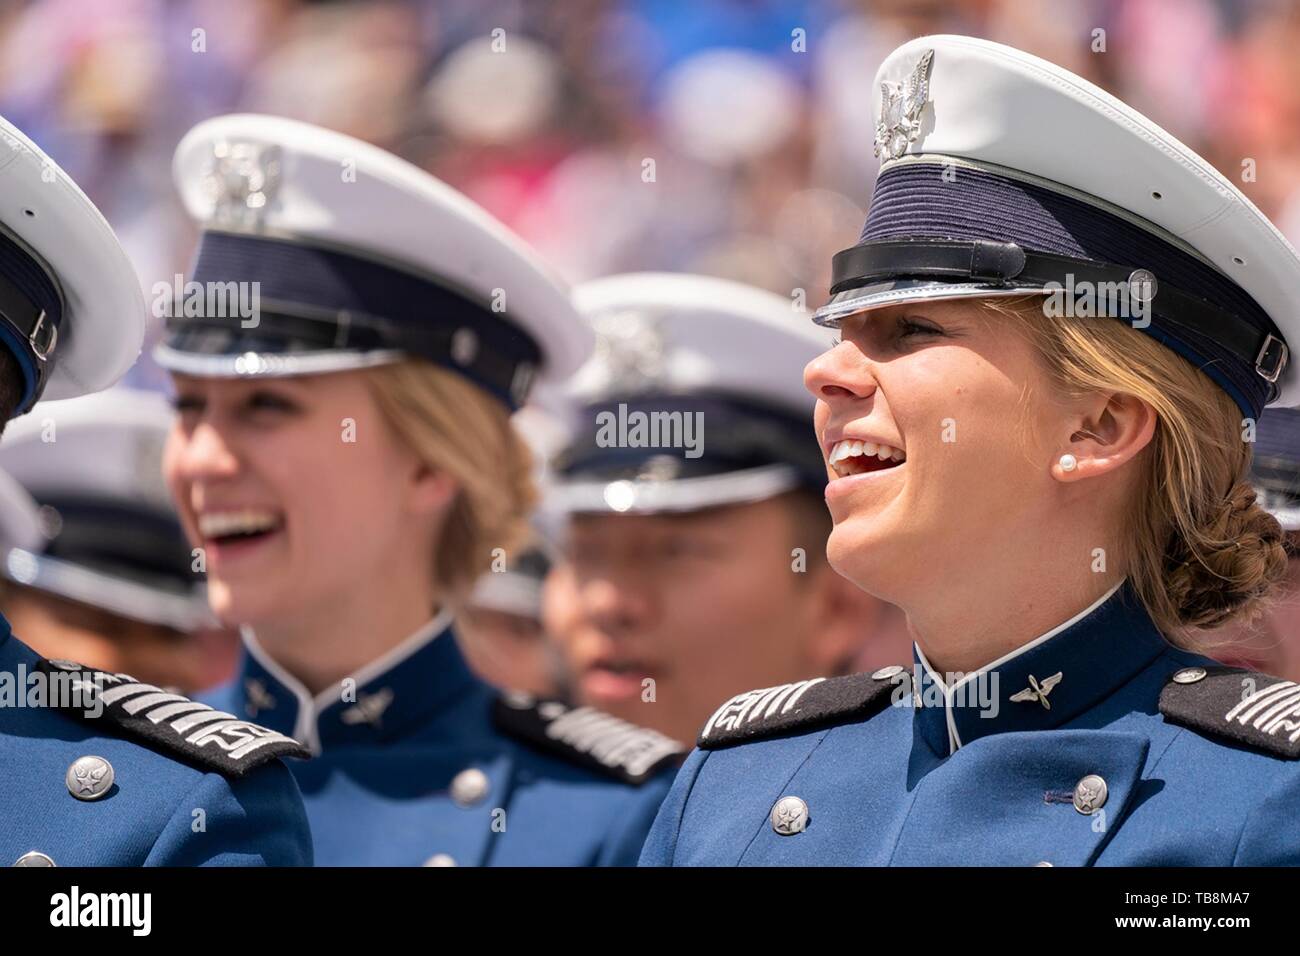 Colorado Springs, Colorado, USA. 30th May, 2019. U.S Air Force Academy cadets during the Graduation Ceremony at the USAF Academy Falcon Stadium May 30, 2019 in Colorado Springs, Colorado. Credit: Planetpix/Alamy Live News Stock Photo